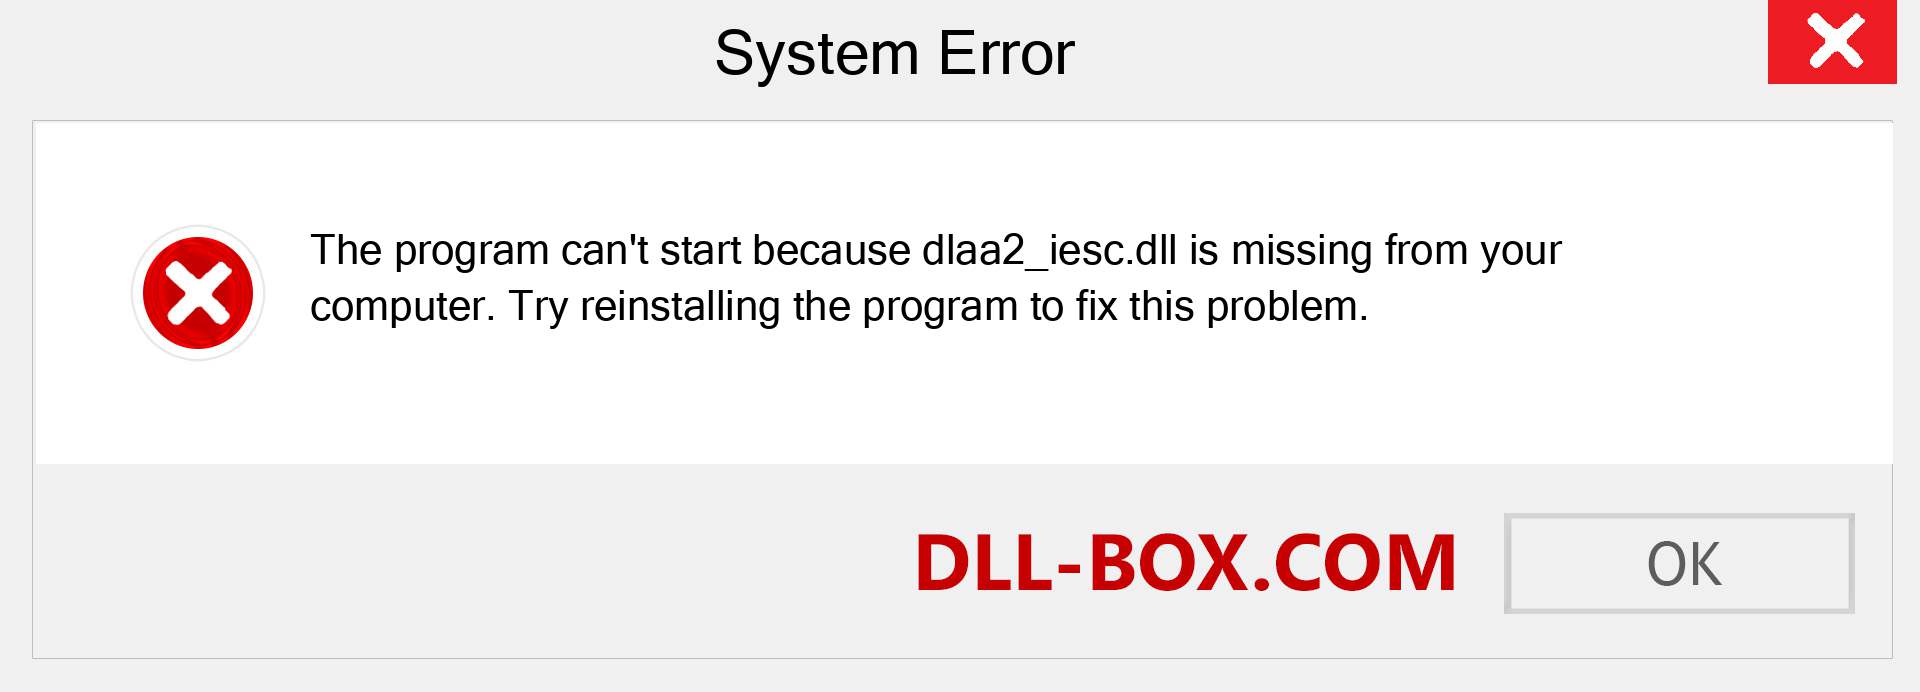  dlaa2_iesc.dll file is missing?. Download for Windows 7, 8, 10 - Fix  dlaa2_iesc dll Missing Error on Windows, photos, images